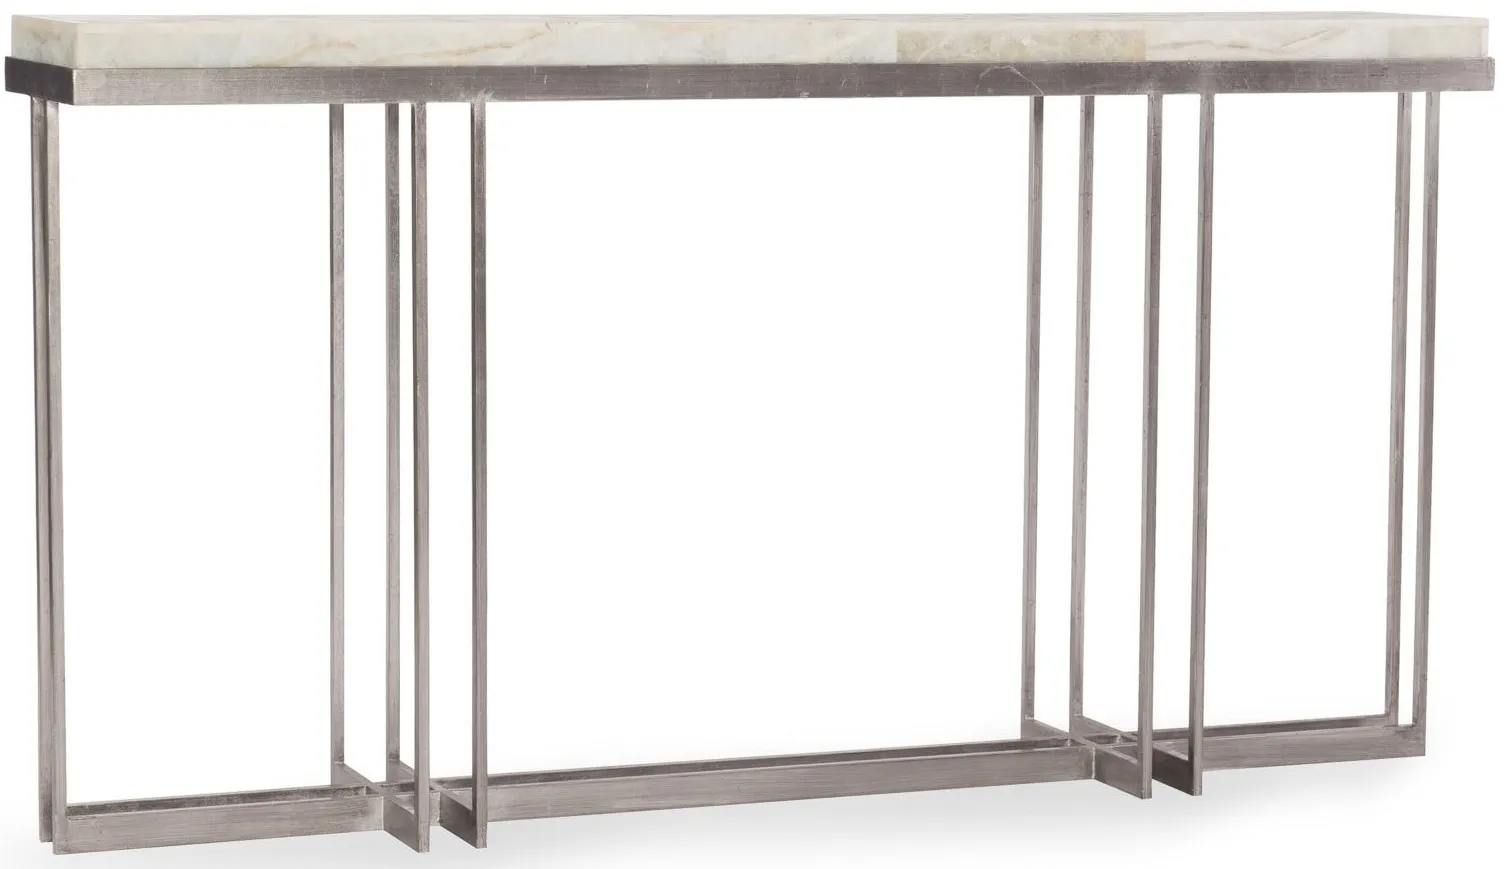 Melange Blaire Rectangular Console Table in White/Cream/Beige by Hooker Furniture